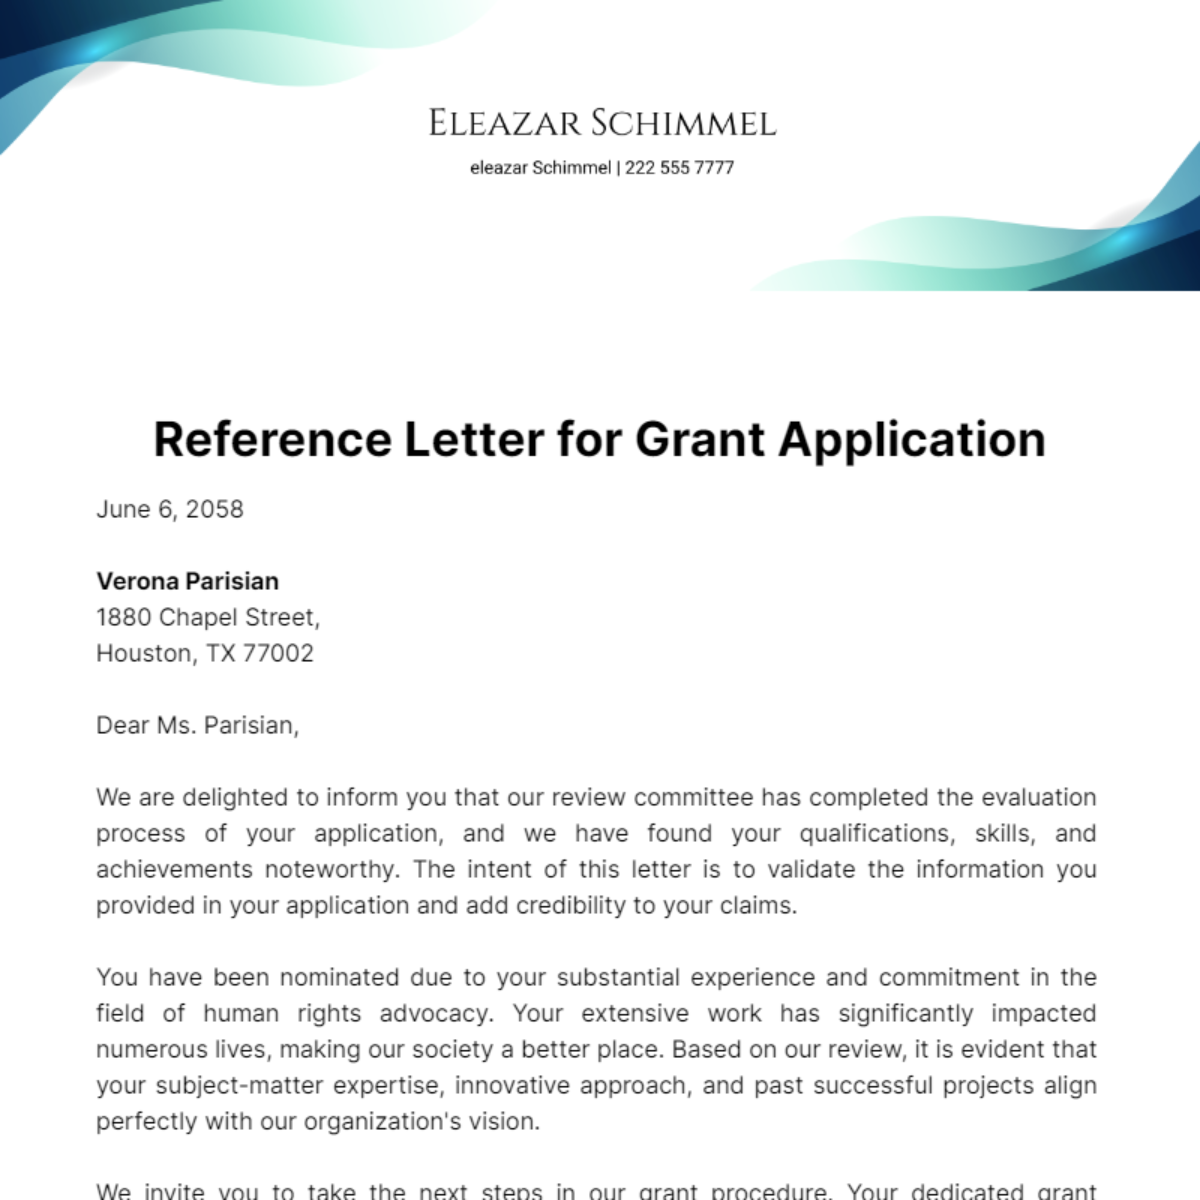 Reference Letter for Grant Application Template